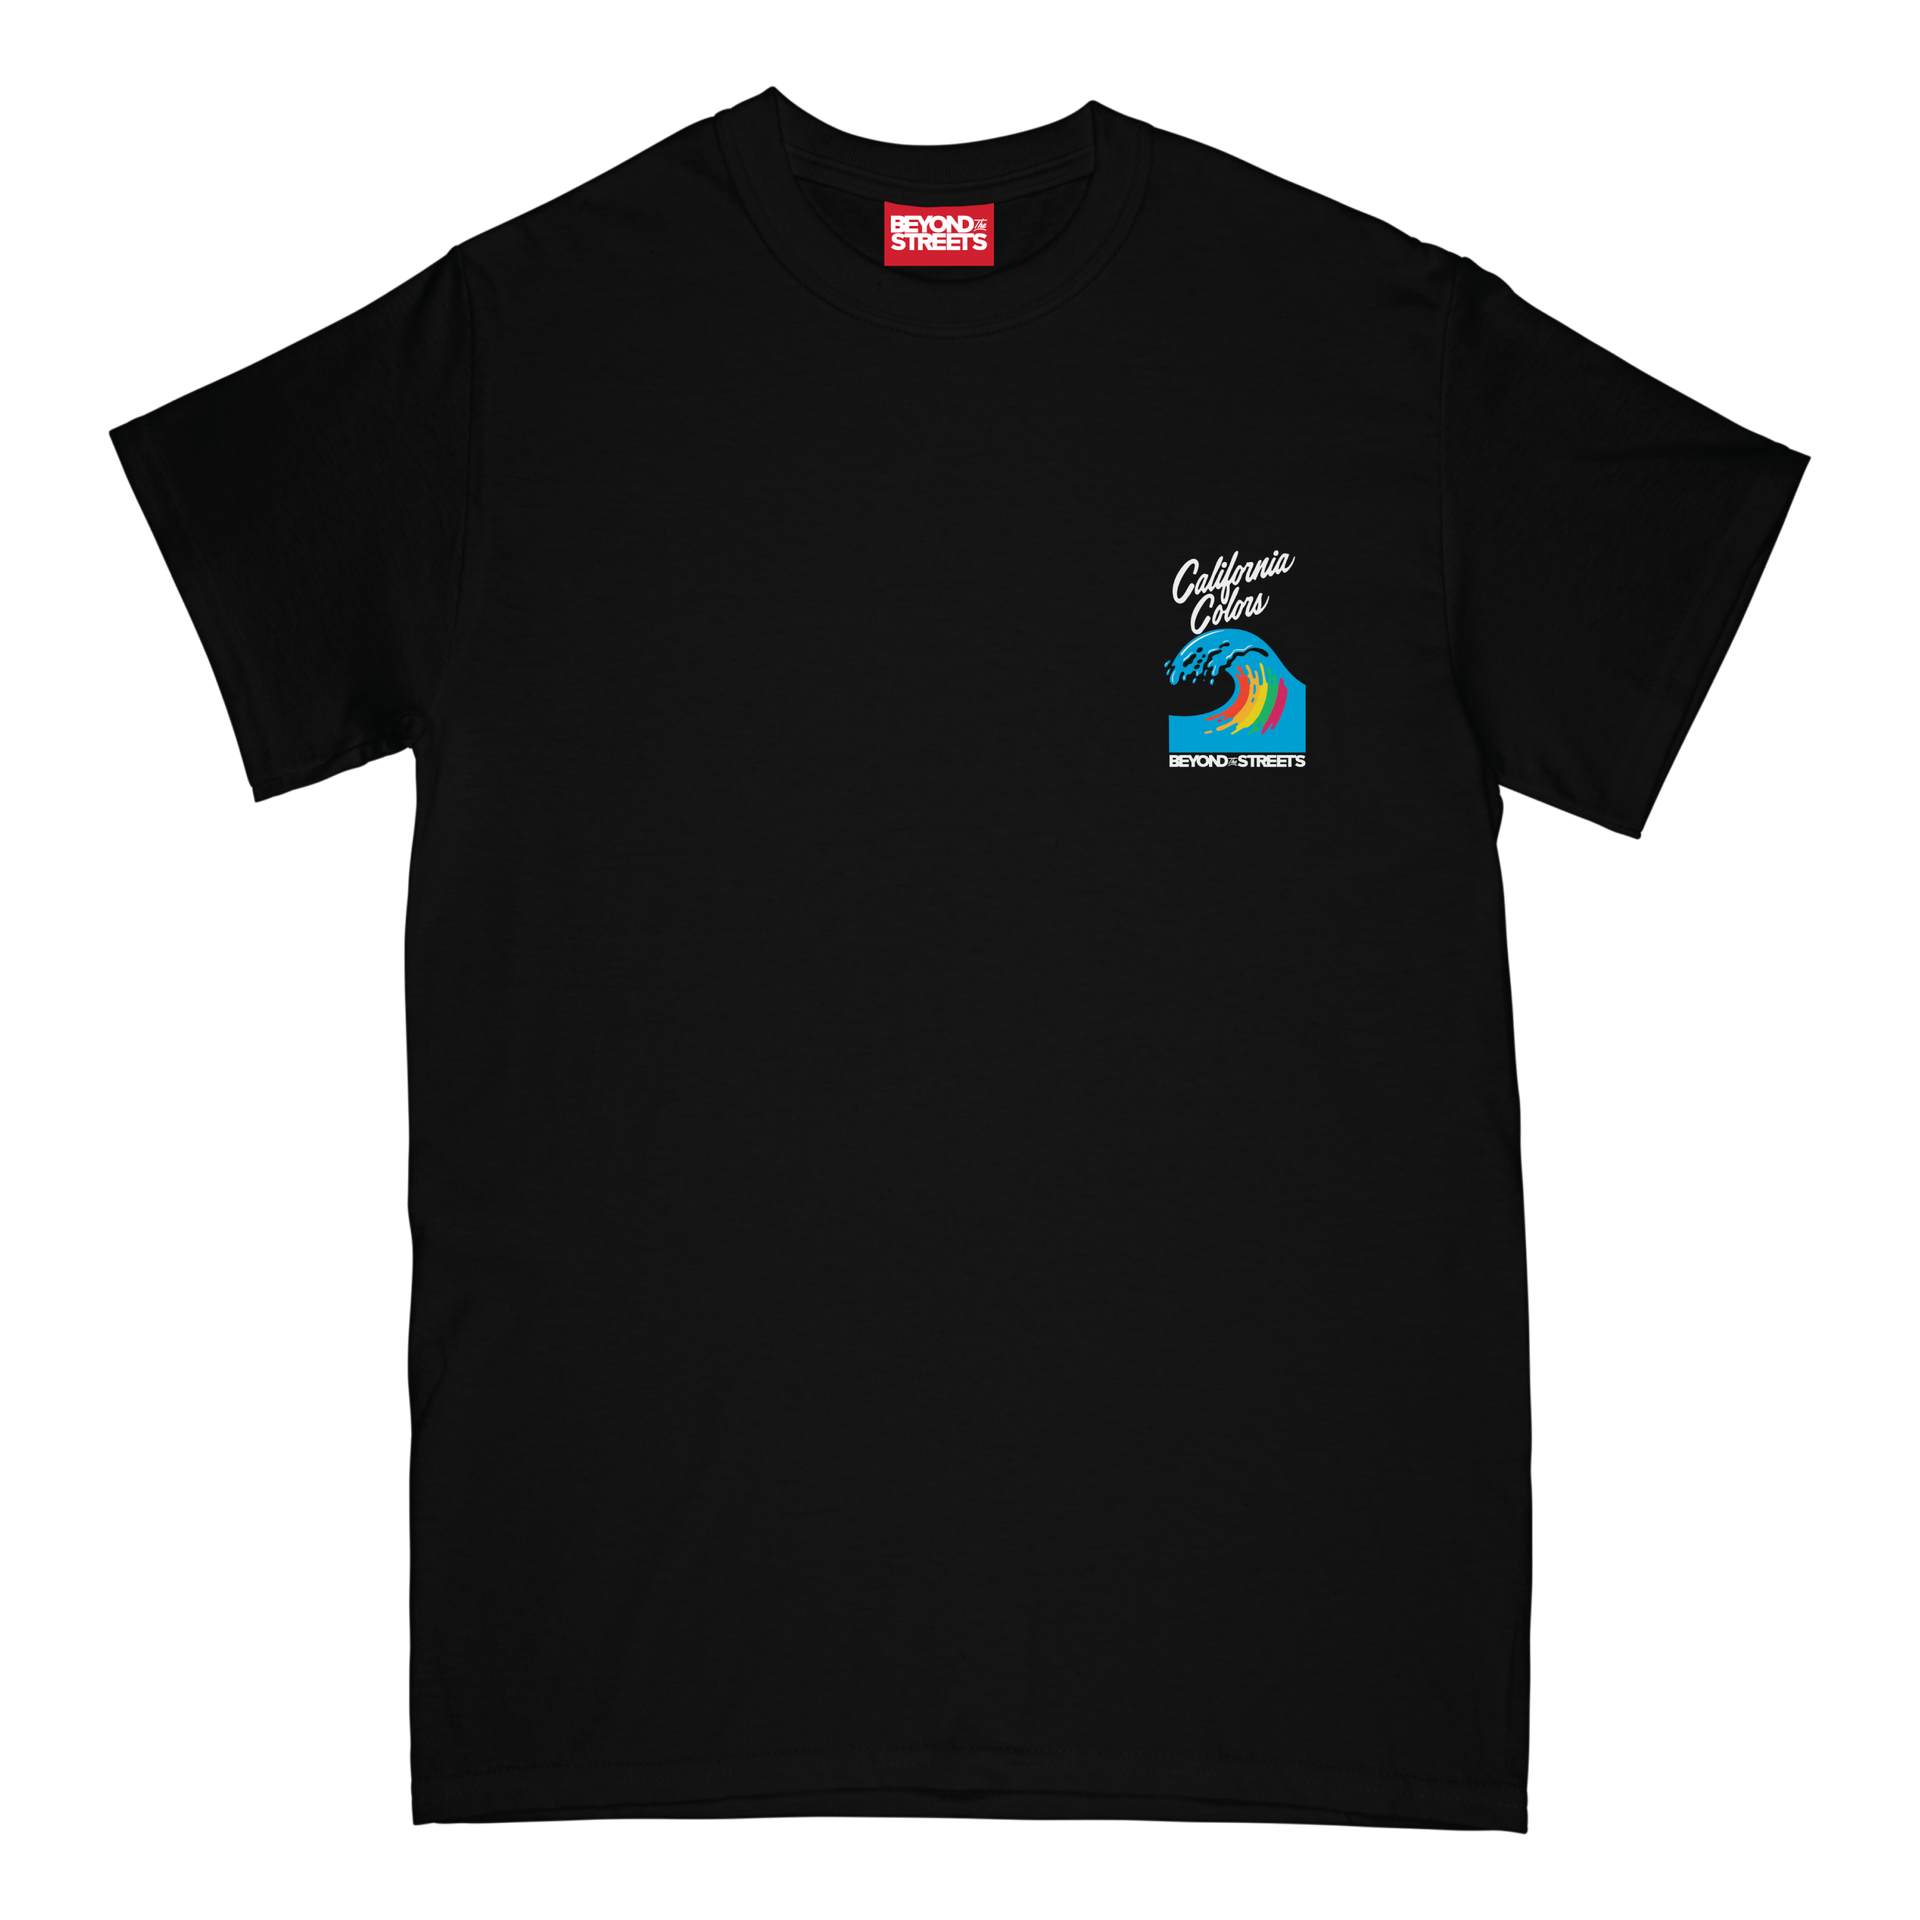 BEYOND THE STREETS "Cali Colors City" Short Sleeve Tee